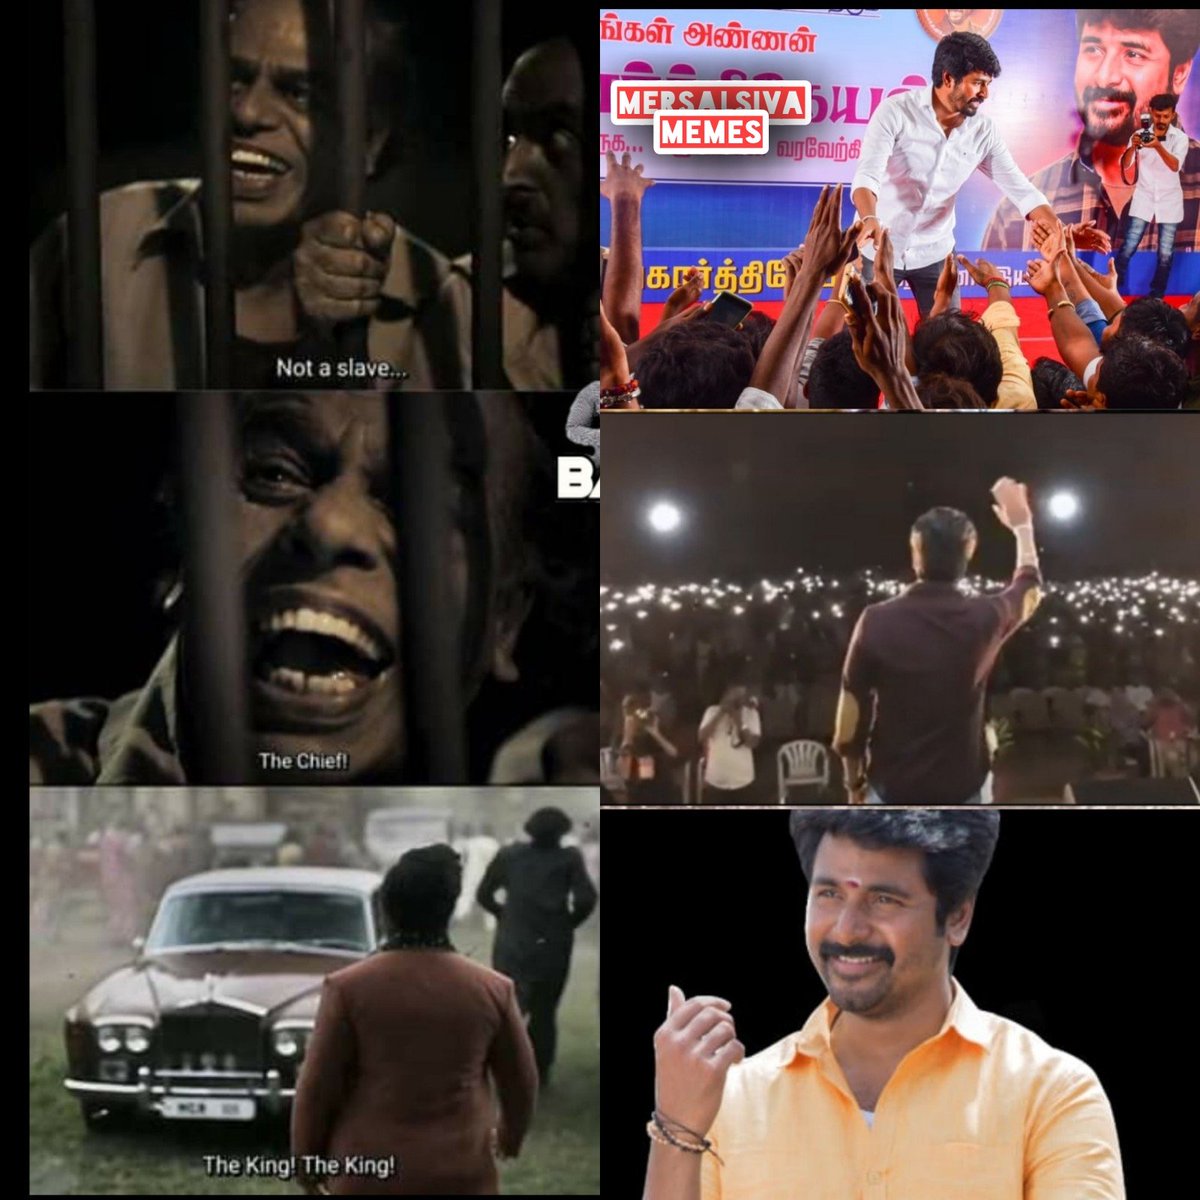  #FamiliesFavouriteSK He became as a king with people's support  @Siva_Kartikeyan 